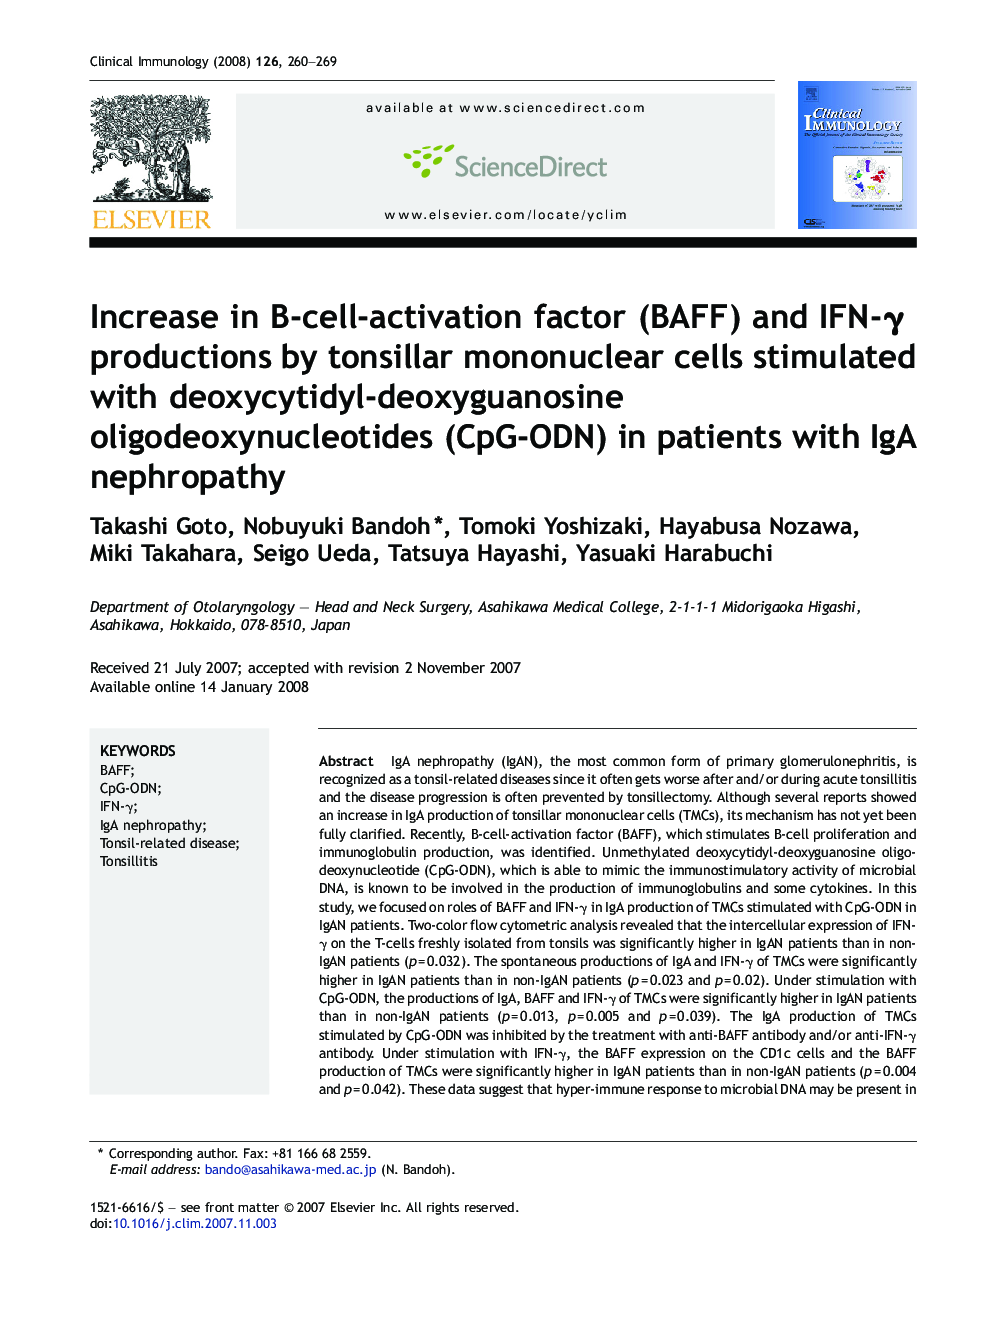 Increase in B-cell-activation factor (BAFF) and IFN-γ productions by tonsillar mononuclear cells stimulated with deoxycytidyl-deoxyguanosine oligodeoxynucleotides (CpG-ODN) in patients with IgA nephropathy